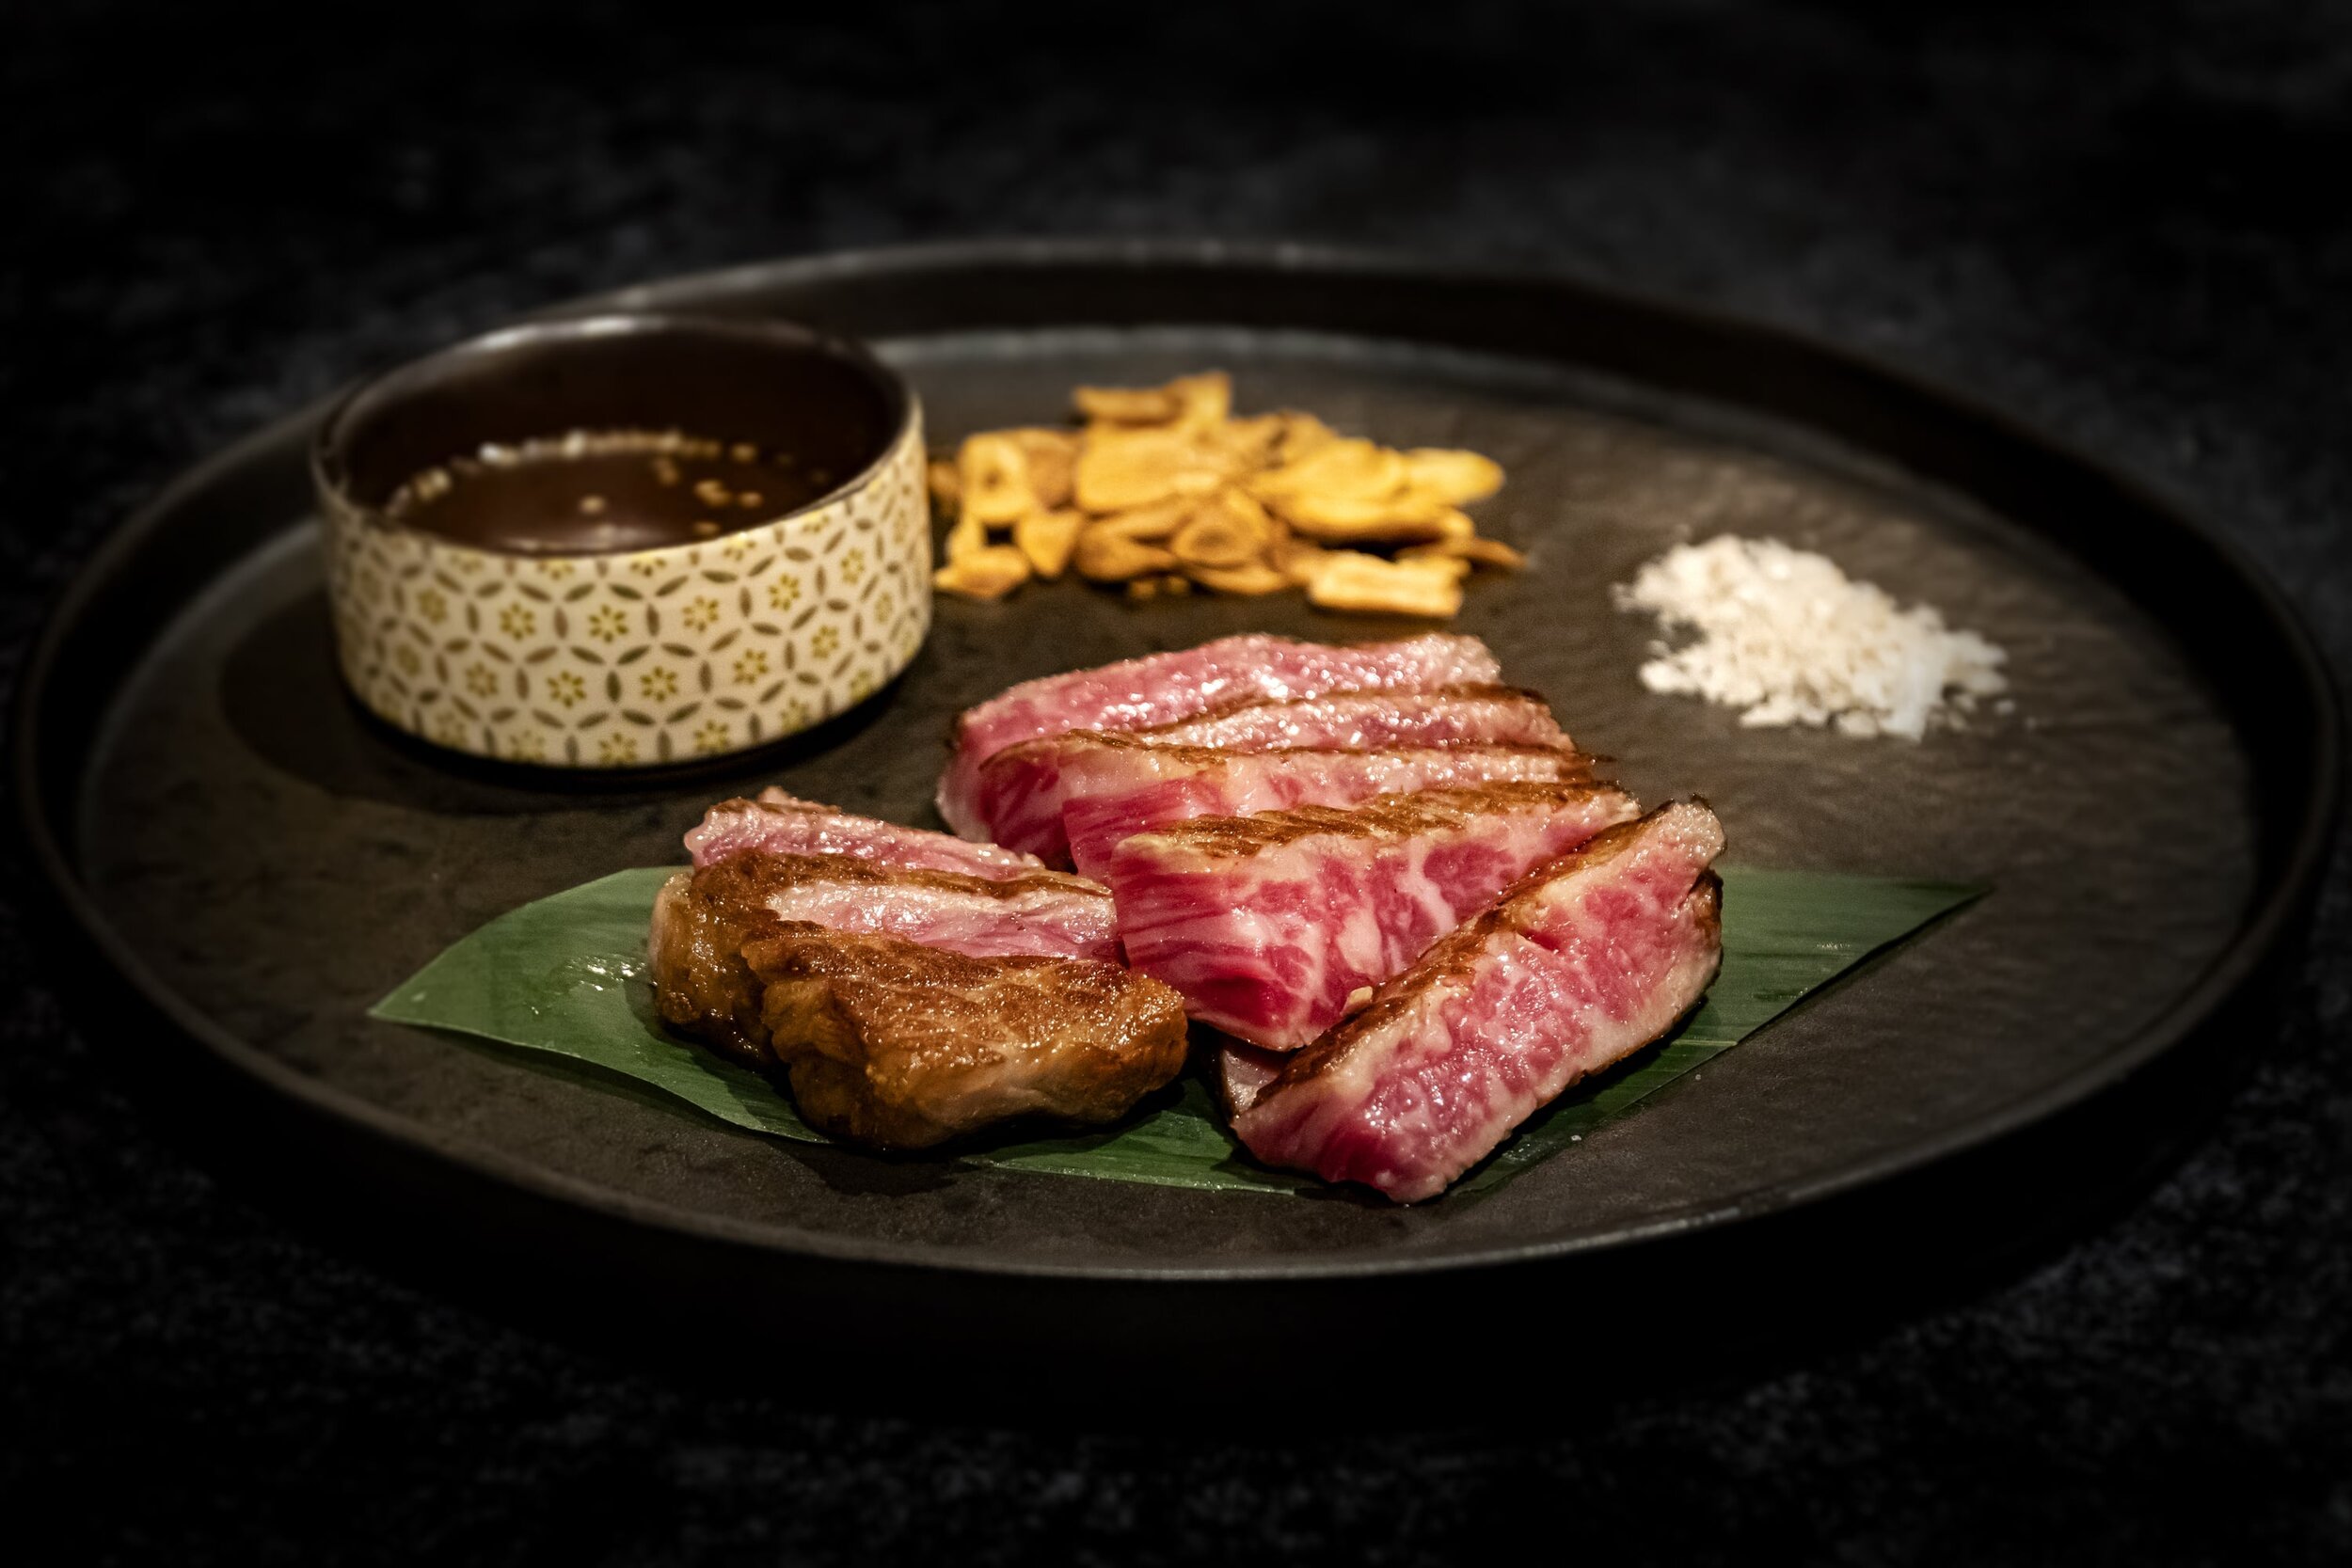 10 Best Restaurant for Wagyu Beef in Singapore